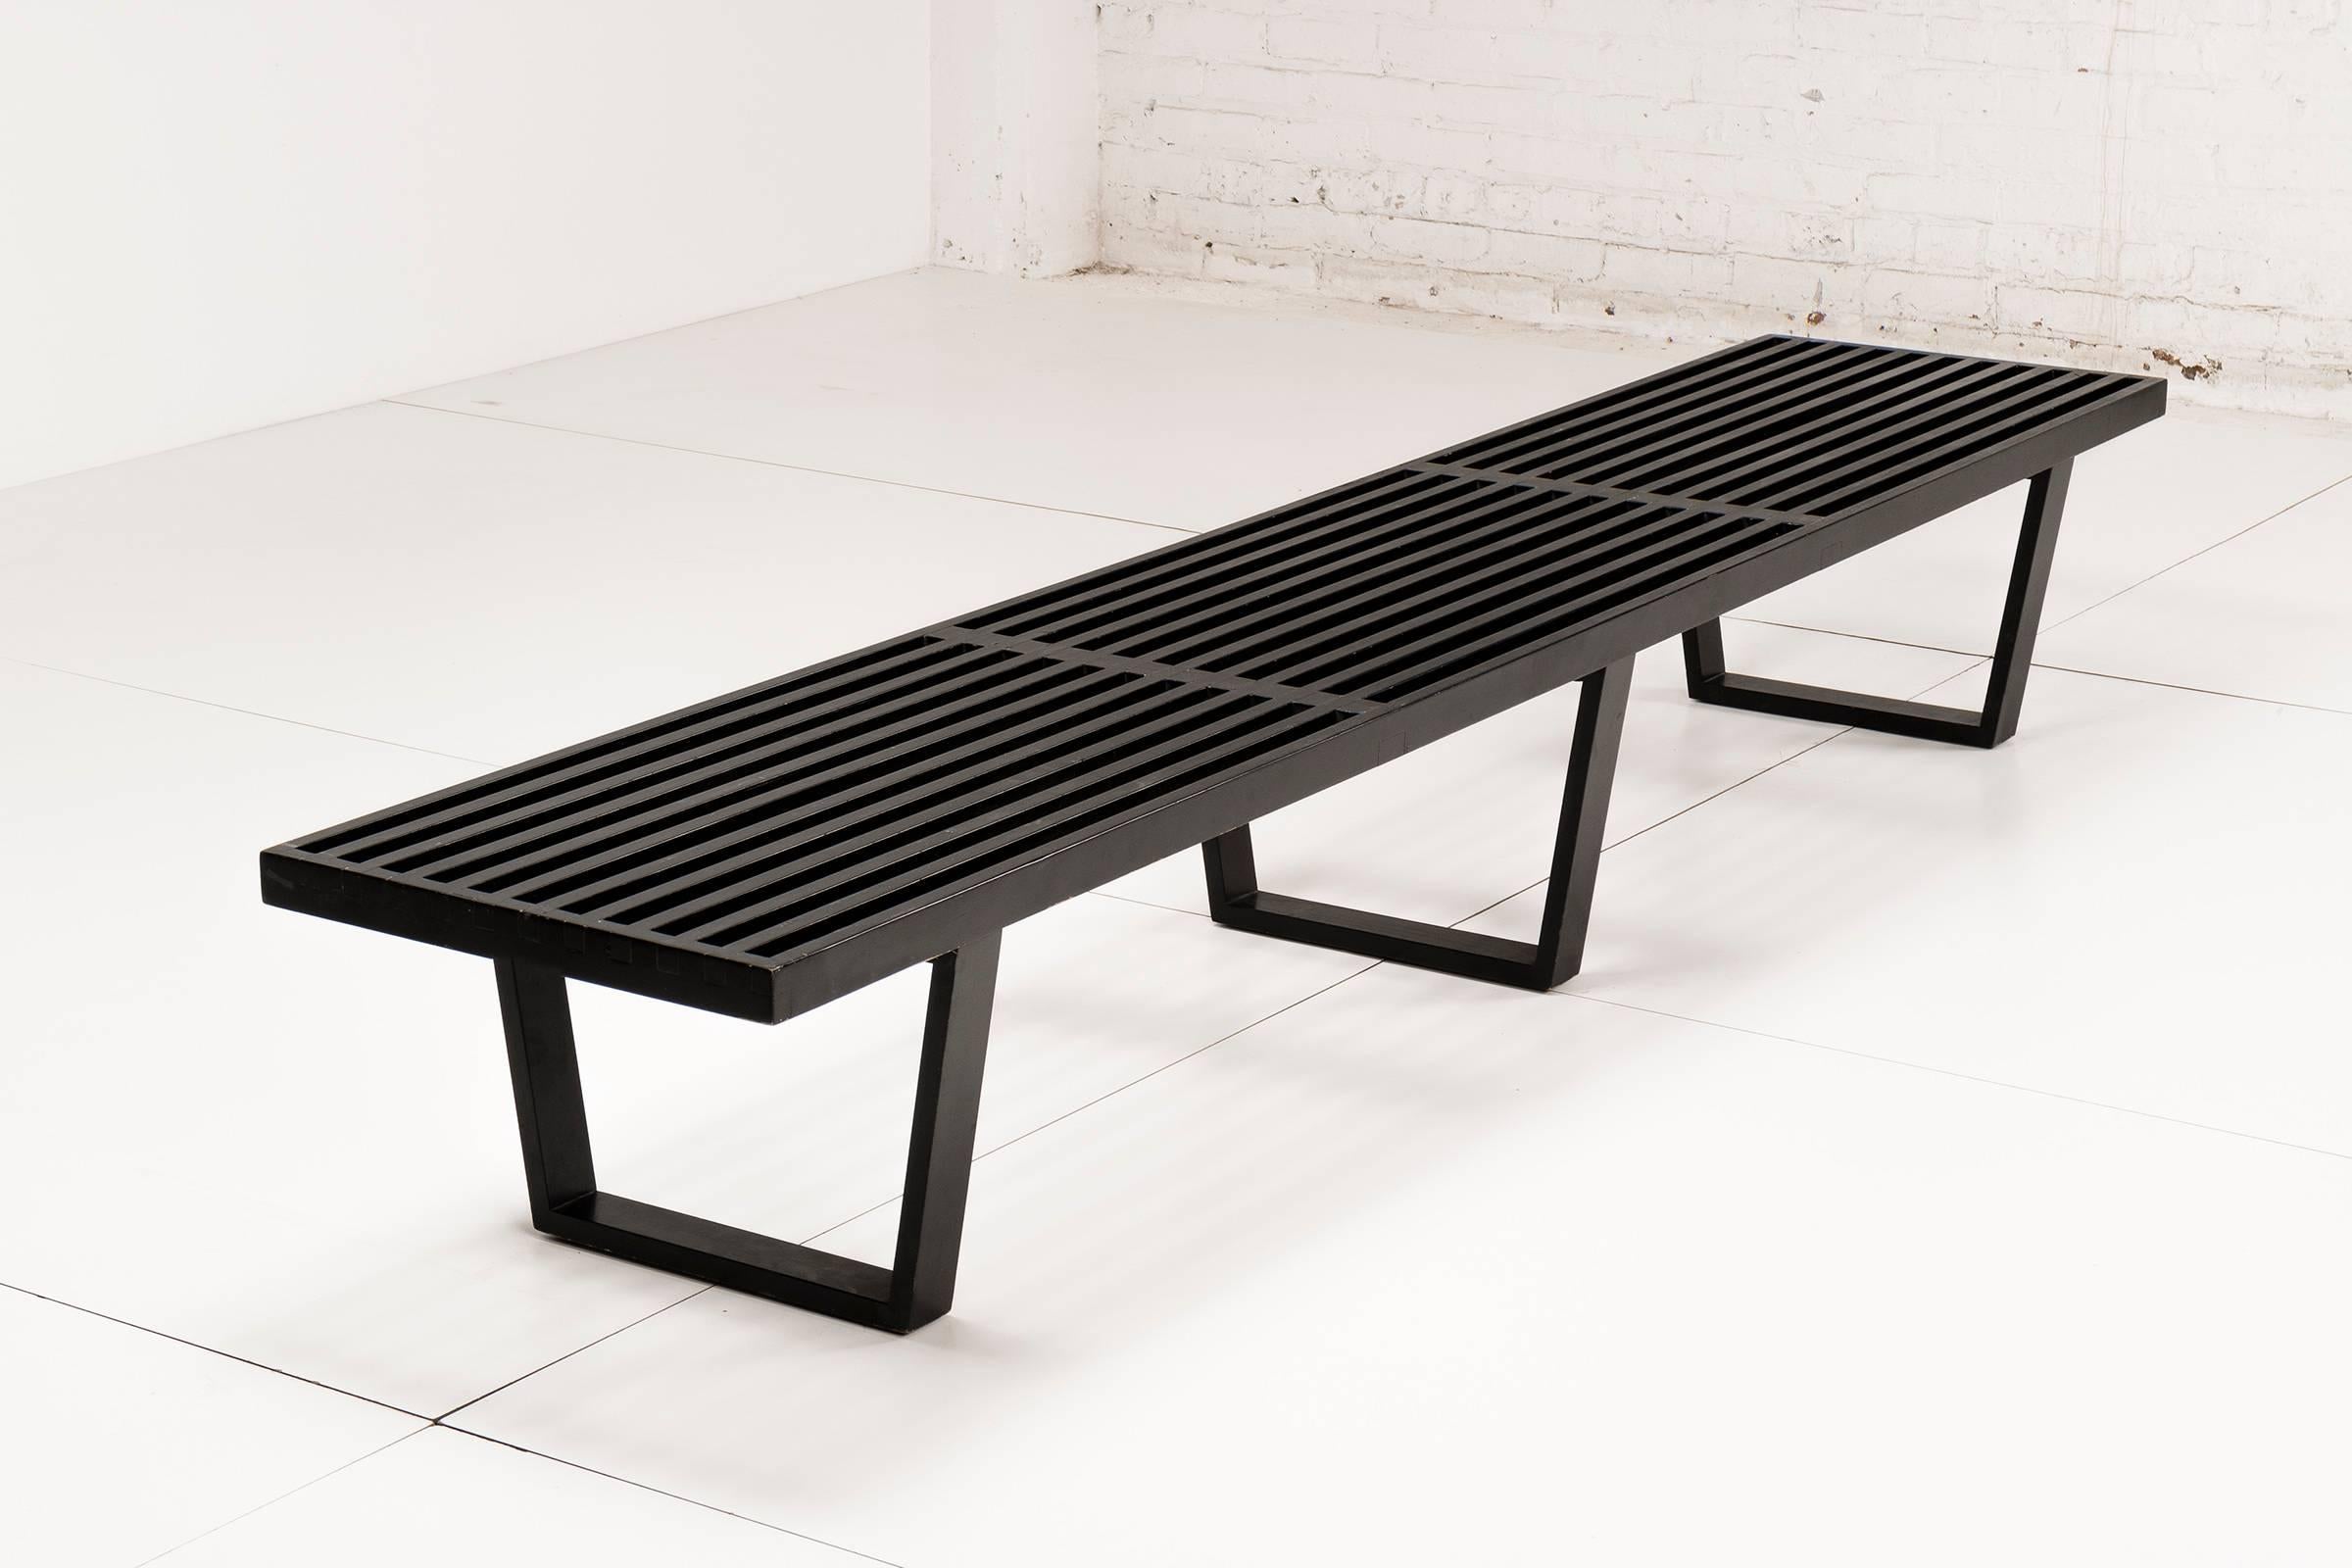 Iconic George Nelson design for Herman Miller. Model 4992. This slat bench is constructed from Black Lacquered Maple with a sled base. This bench can be used both as seating and as a coffee of sofa table. Cabinet sold separately.